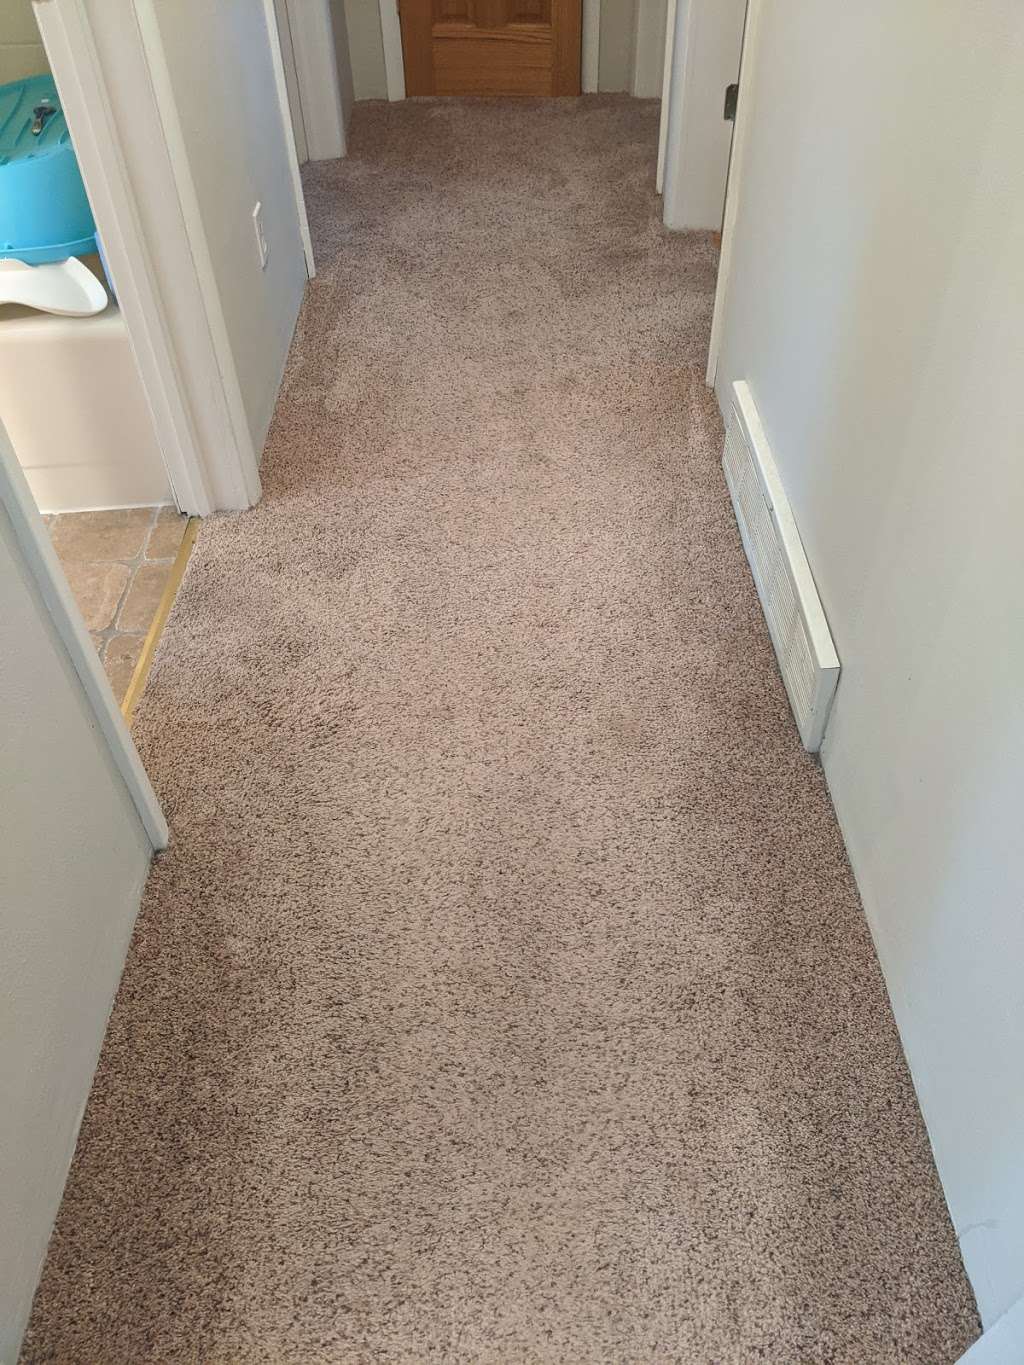 Able Carpet Cleaners | 346 Forest Grove Dr, Pewaukee, WI 53072, USA | Phone: (262) 391-5936